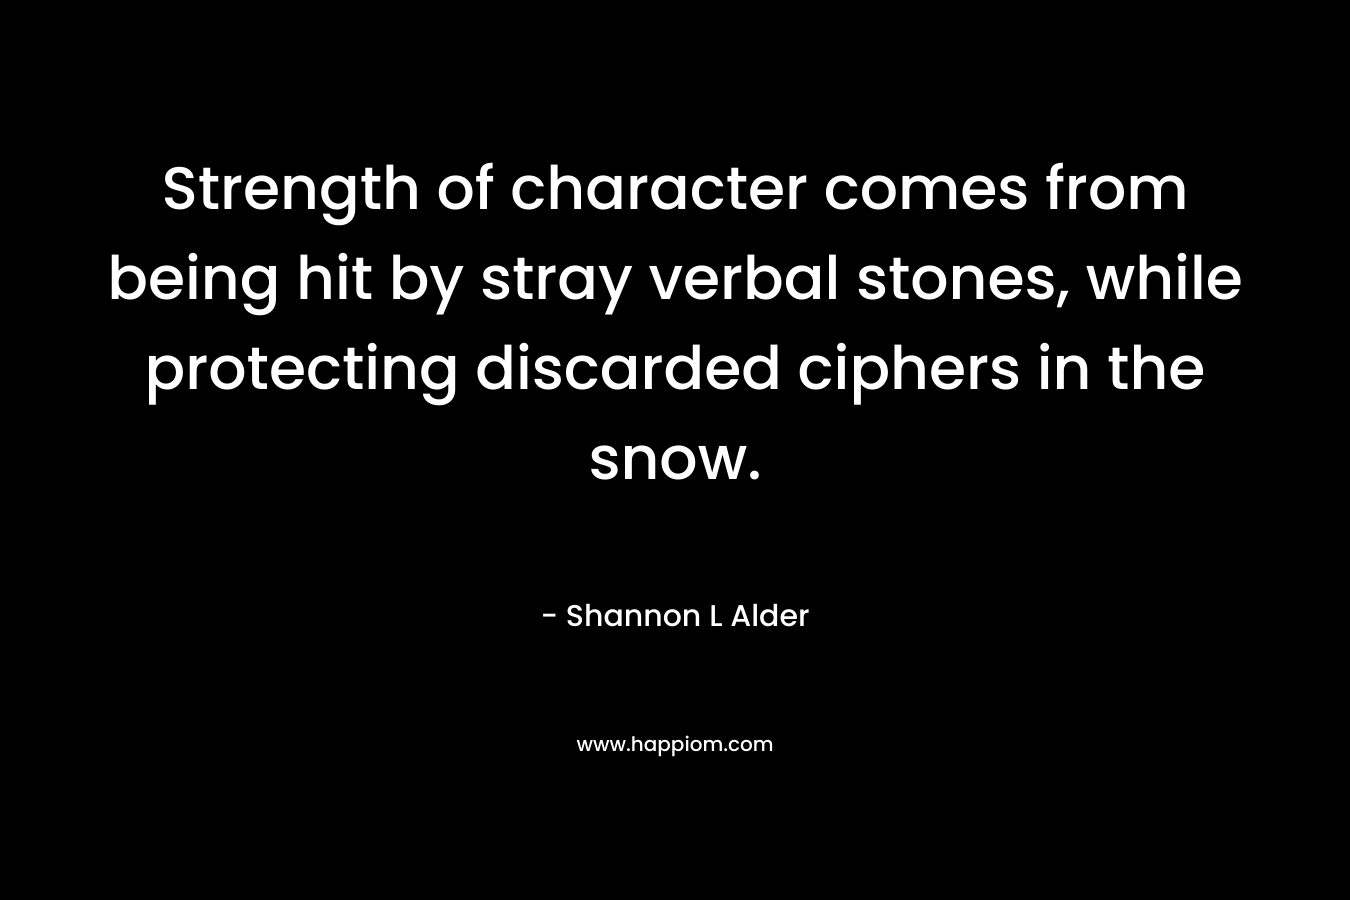 Strength of character comes from being hit by stray verbal stones, while protecting discarded ciphers in the snow. – Shannon L Alder